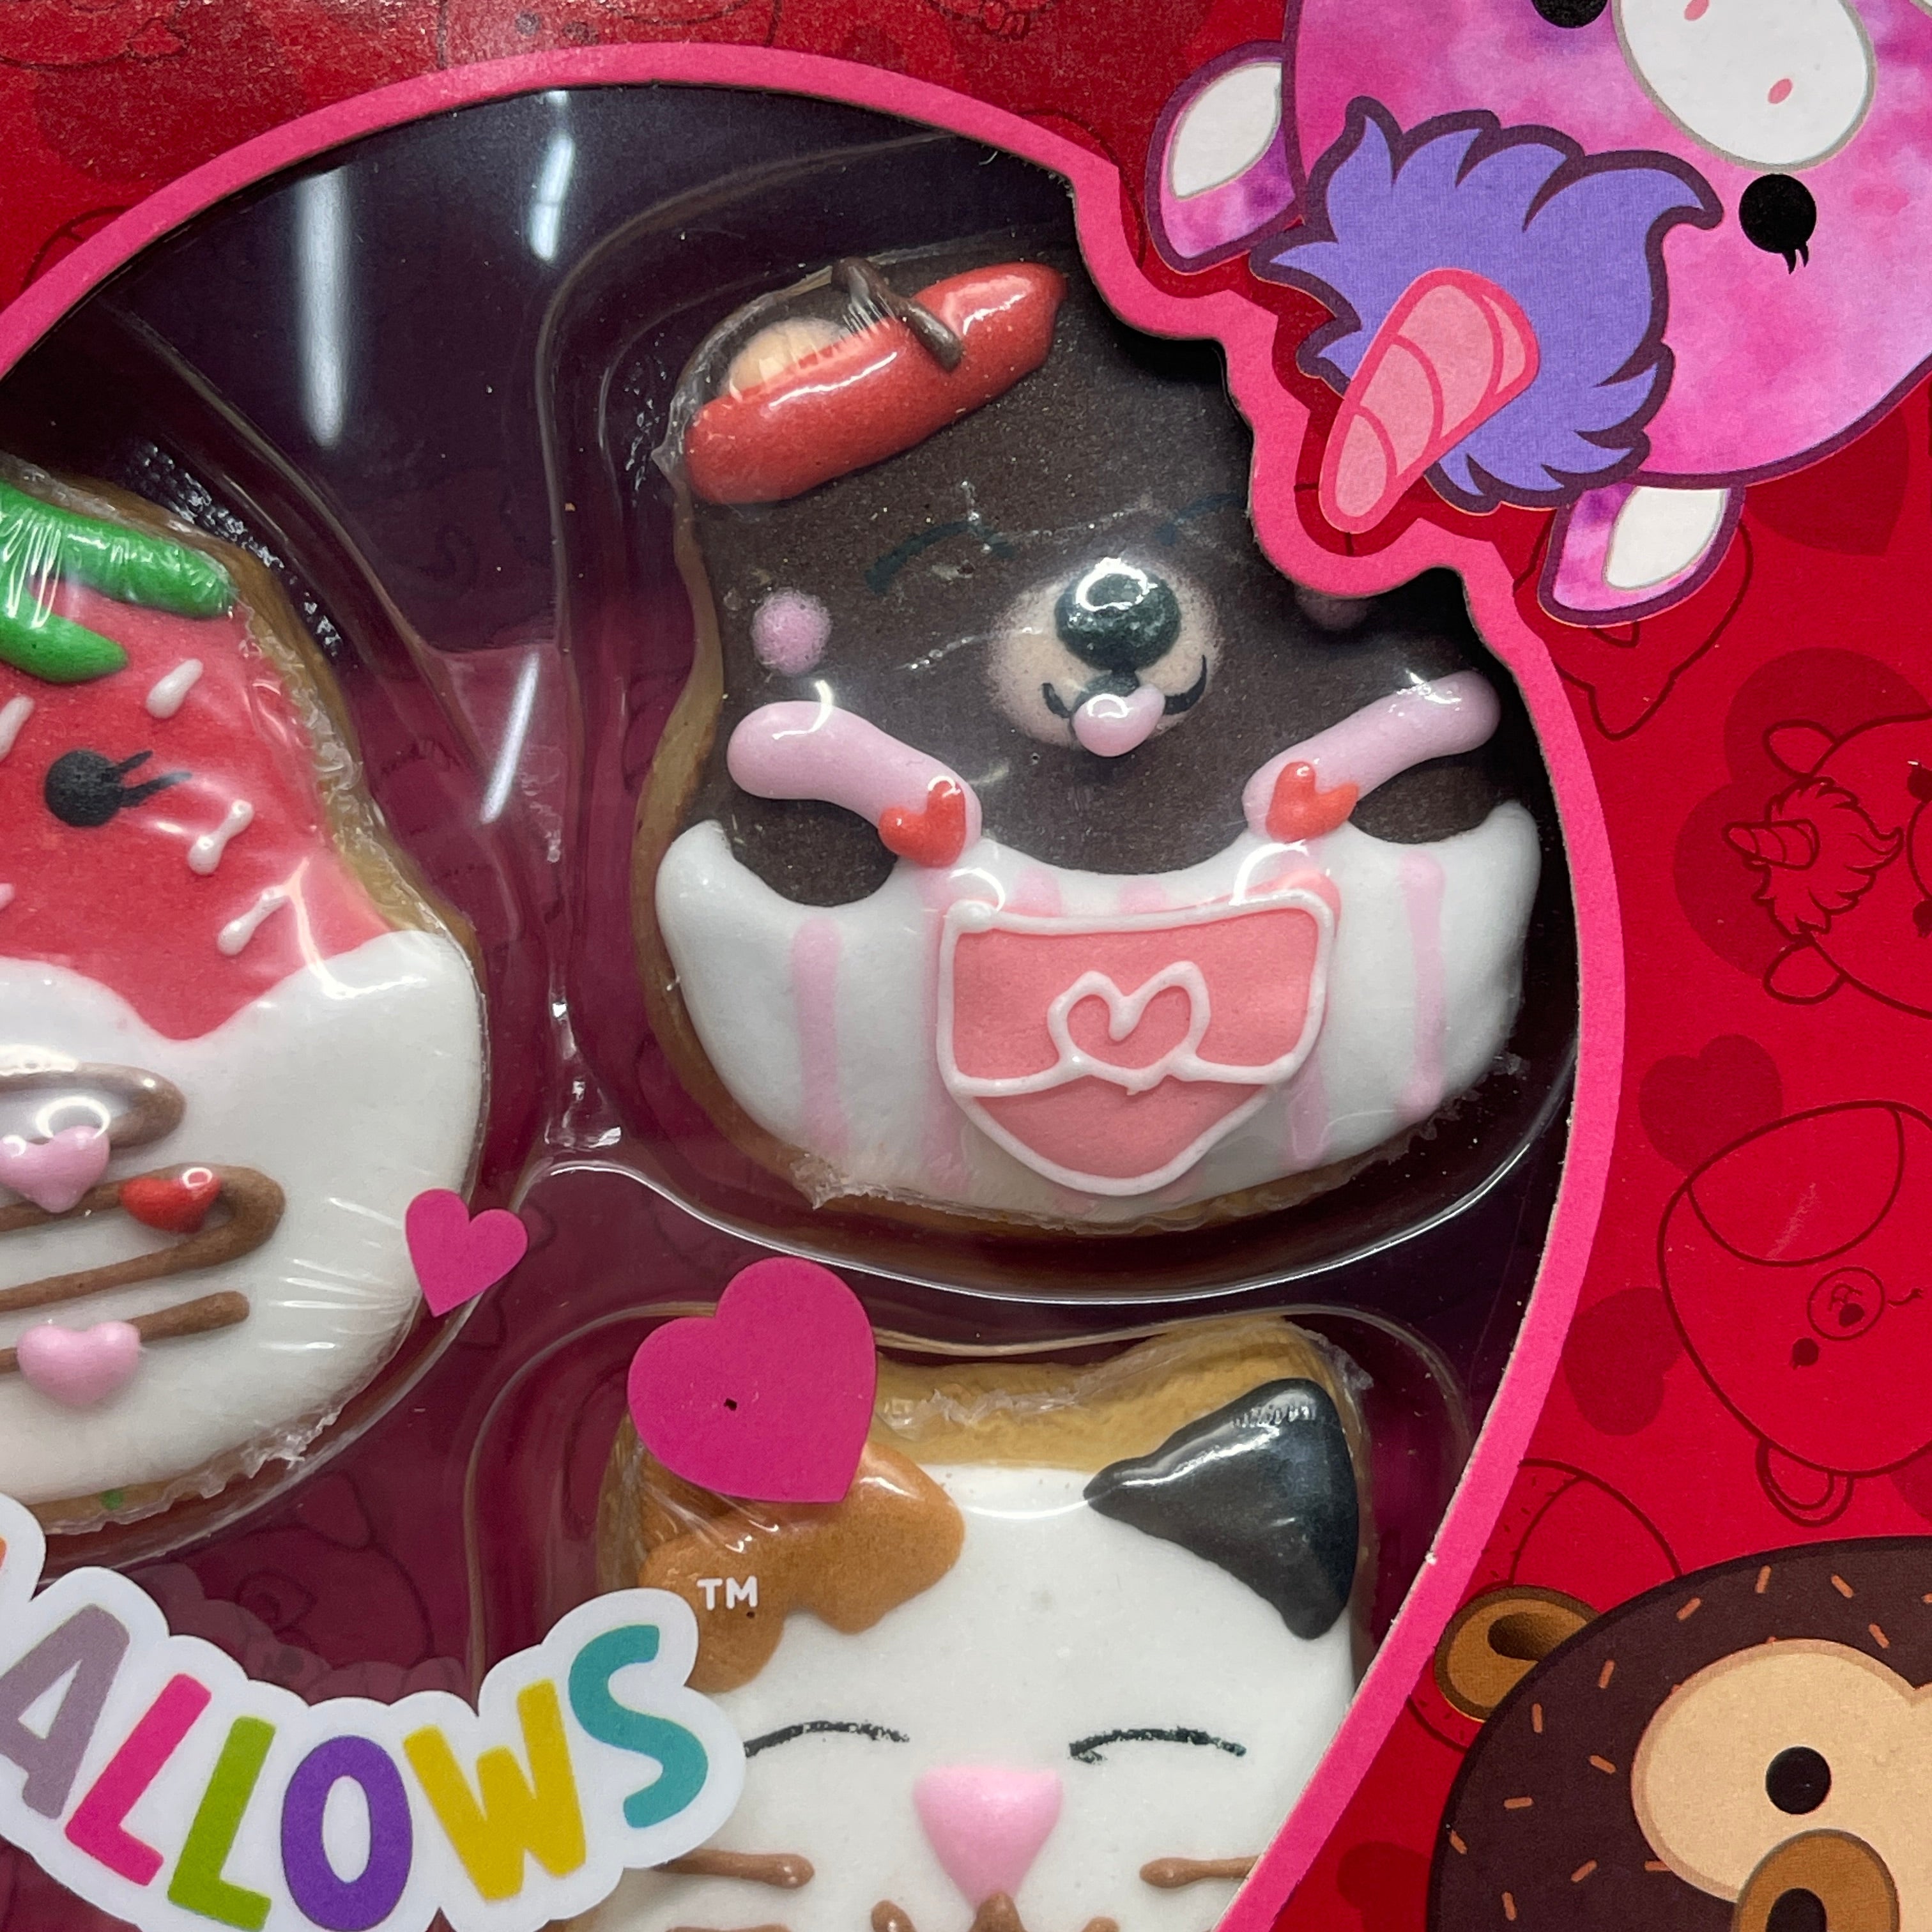 ZA@ SQUISHMALLOW (12 PACK) 6 Decorated Character Shaped Sugar Cookies 4.2 oz (08/25) A